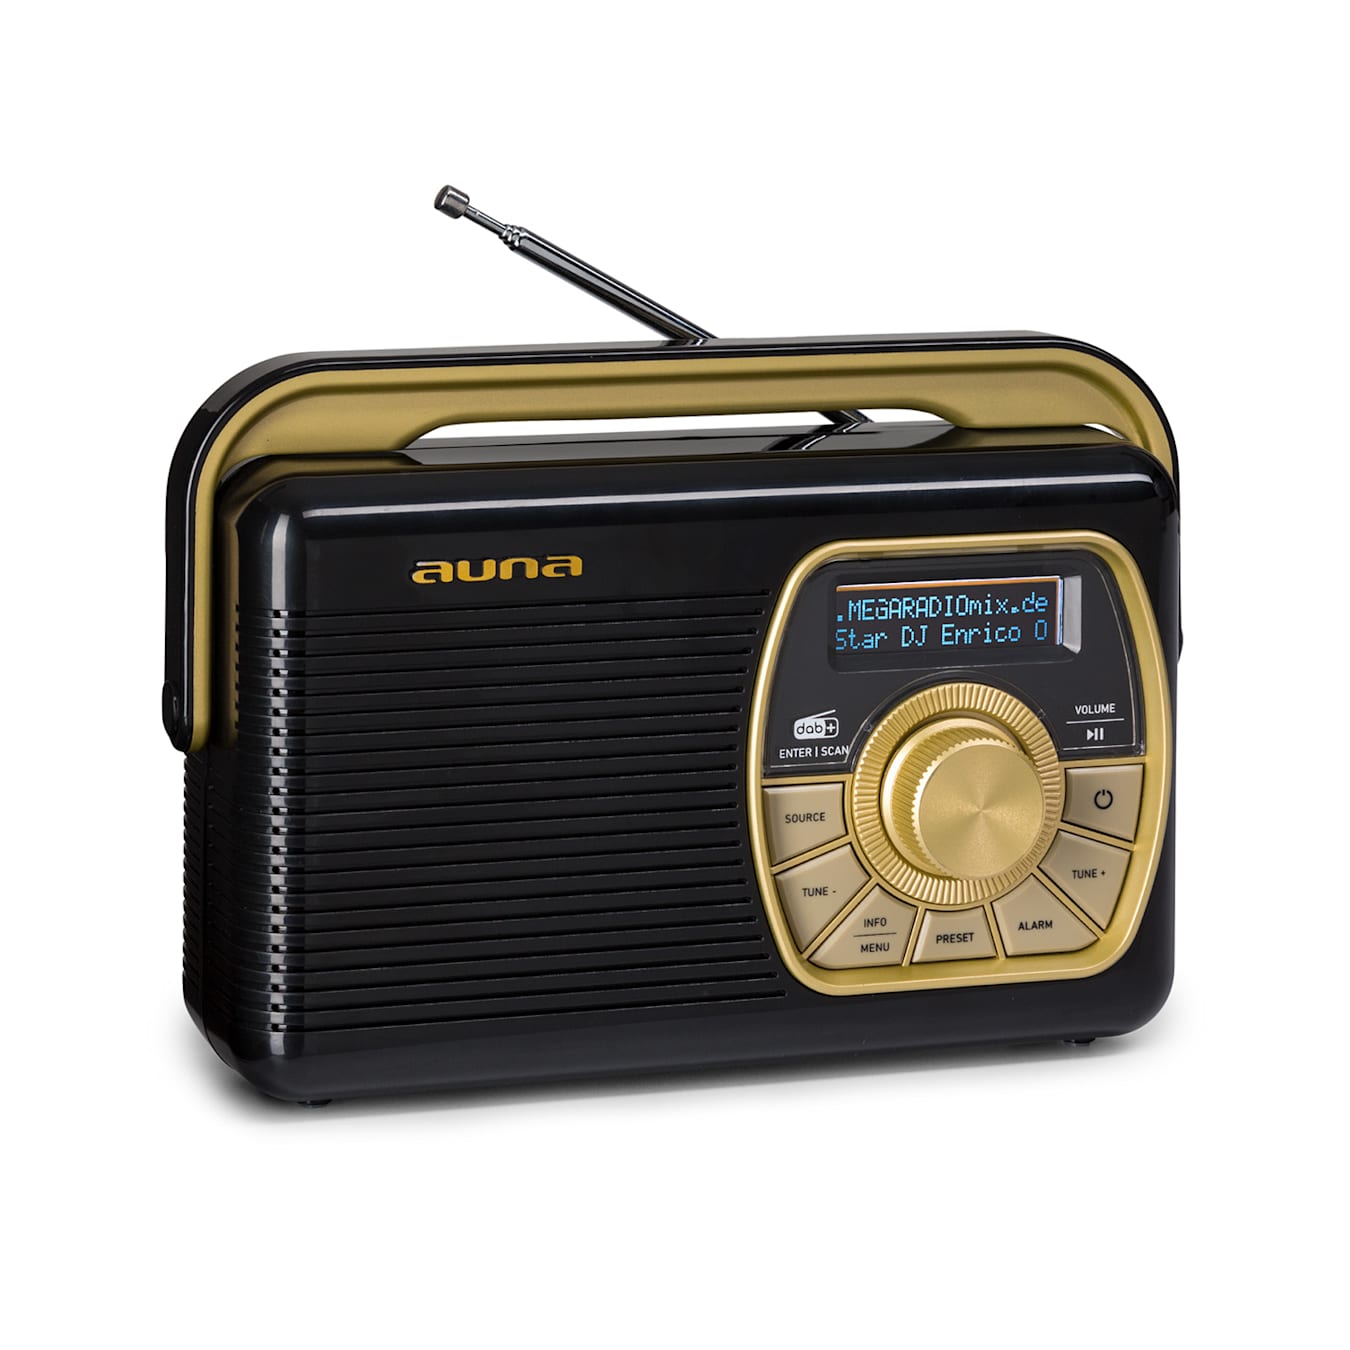 Portable WLAN-internet/DAB+/FM-radio with Bluetooth®, rechargeable Li-Ion  battery